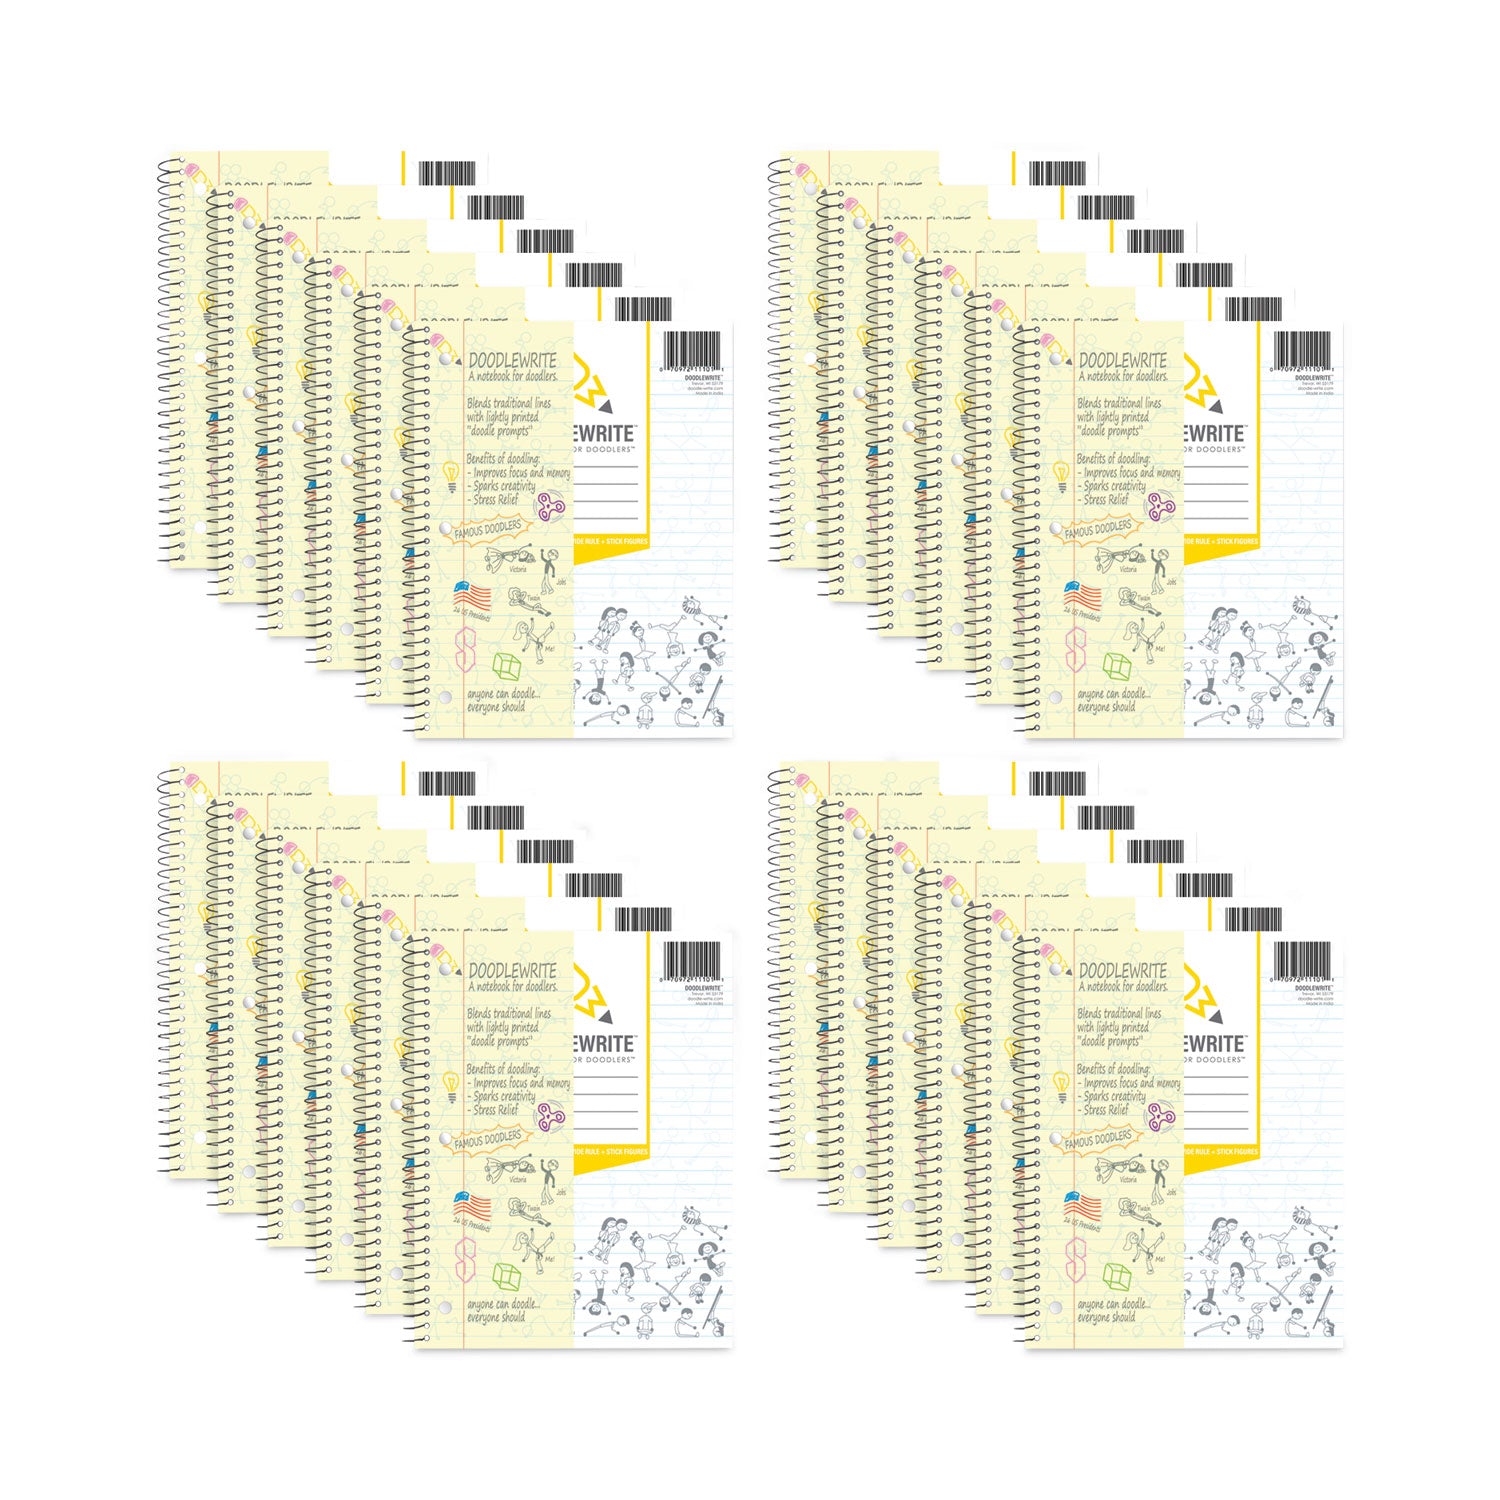 doodlewrite-notebooks-1-subject-wide-legal-rule-white-cover-50-sheets-24-carton-ships-in-4-6-business-days_roa11101cs - 2